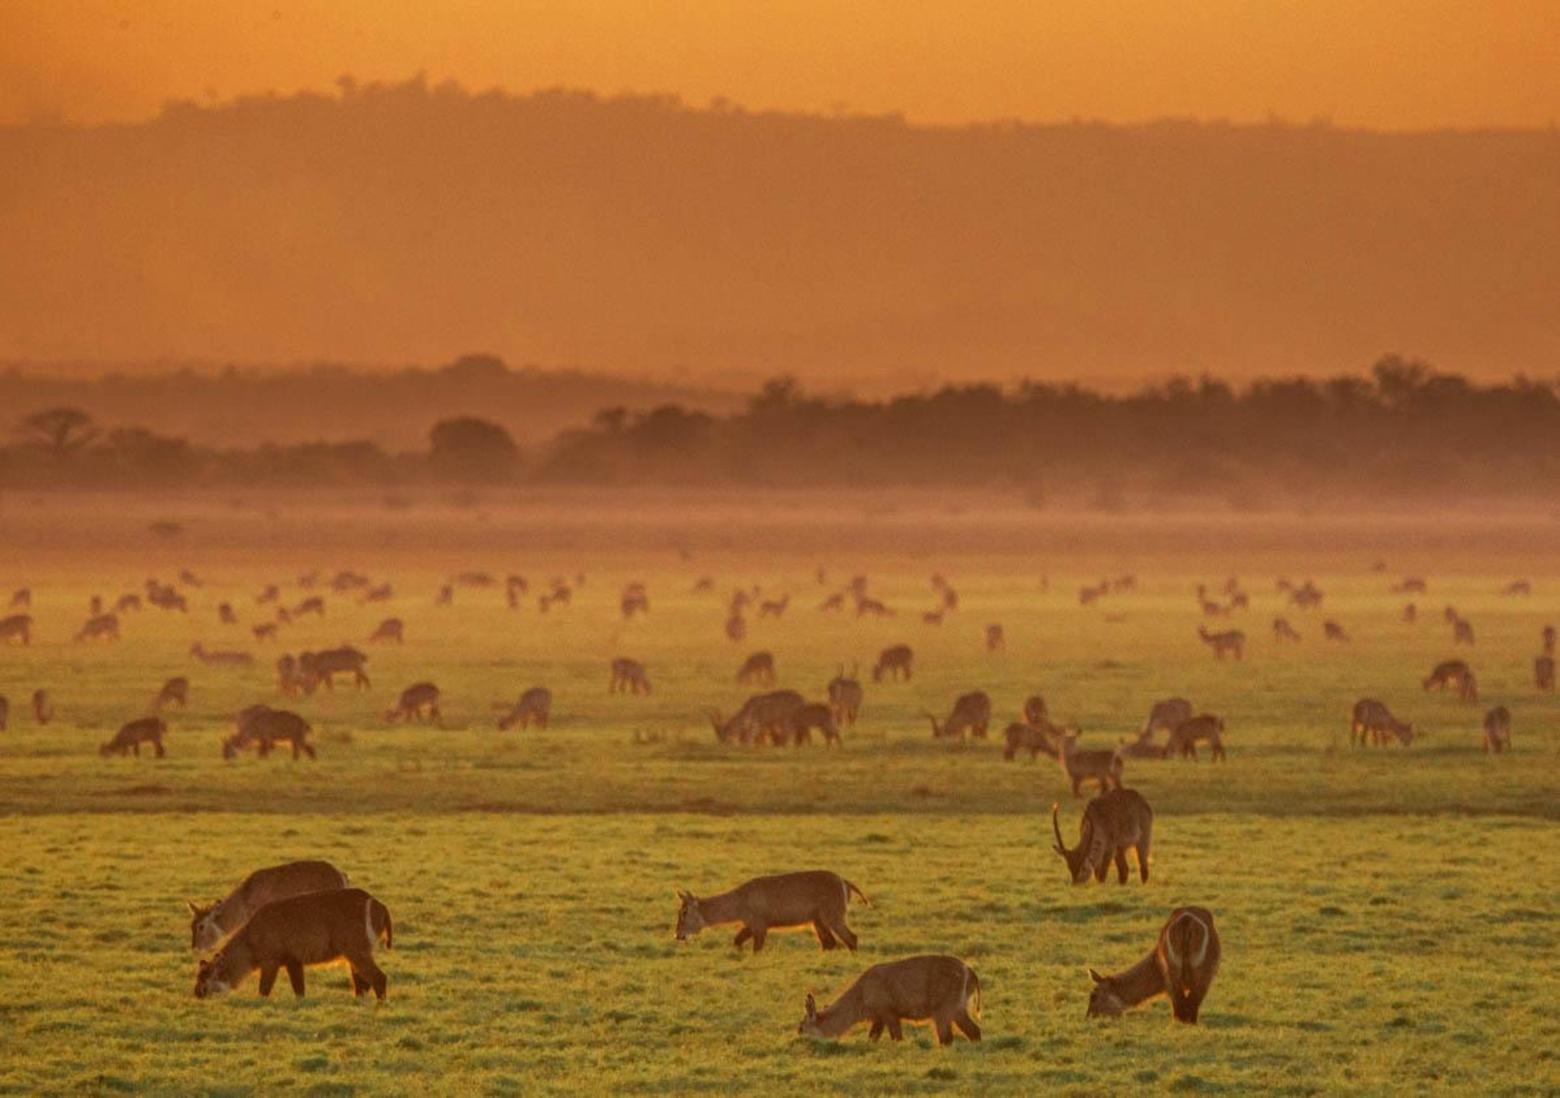 Gorongosa is today a vision of hope where ecological recovery meets enchanting landscapes and people searching to find a sustainable path forward that works for them. At top: Fog rolls across the valley while in image beneath, waterbuck graze at sunset. Photographs courtesy Brett Kuxhausen  